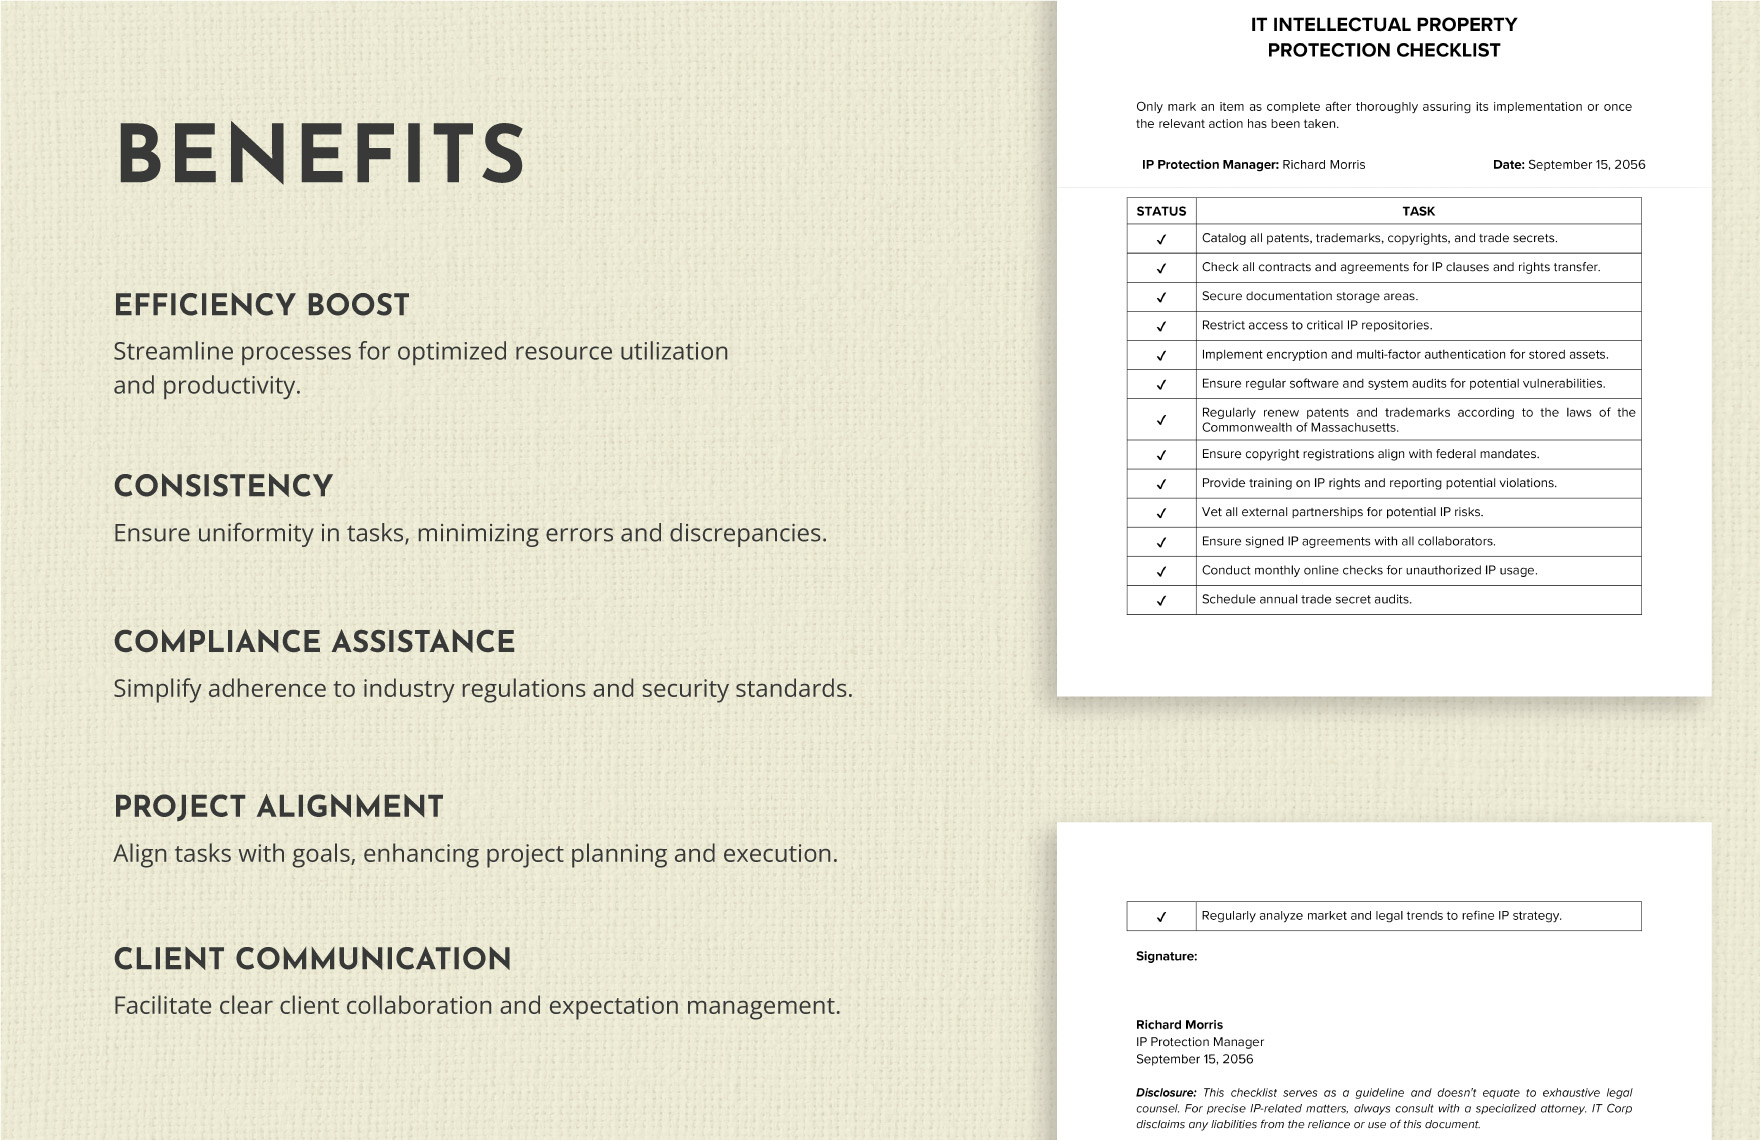 IT Intellectual Property Protection Checklist Template